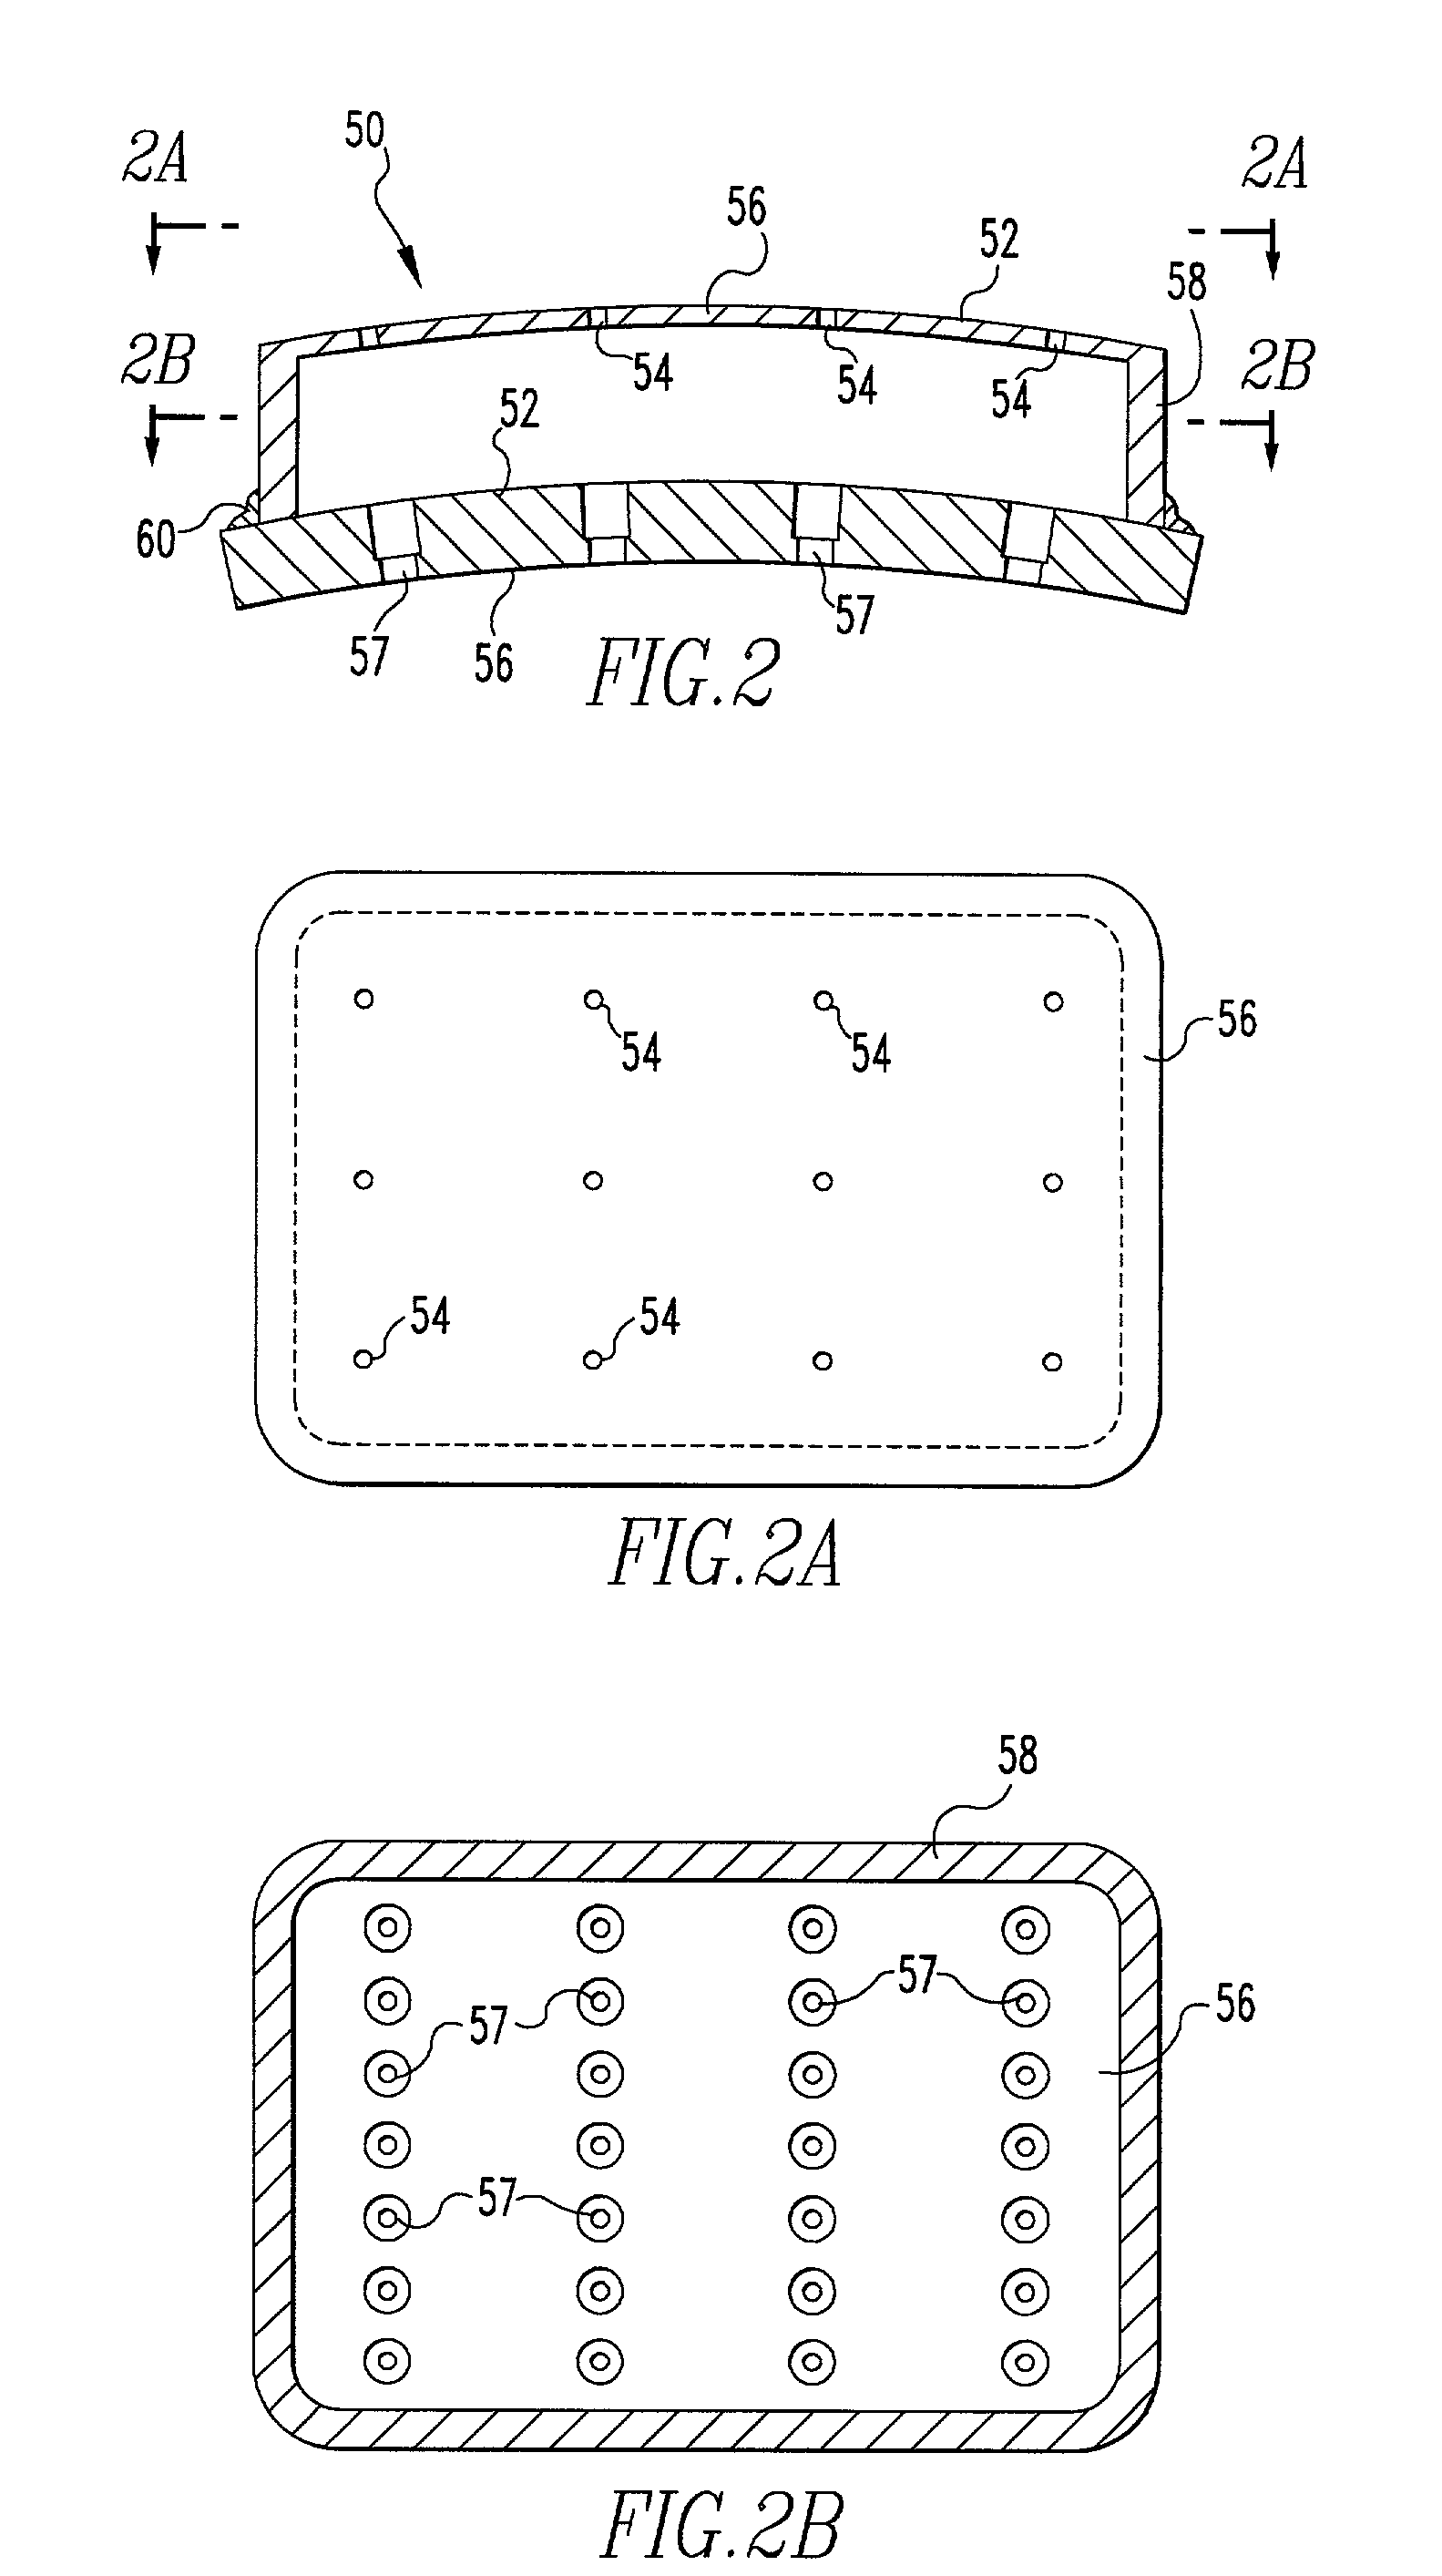 Resonator adopting counter-bored holes and method of suppressing combustion instabilities